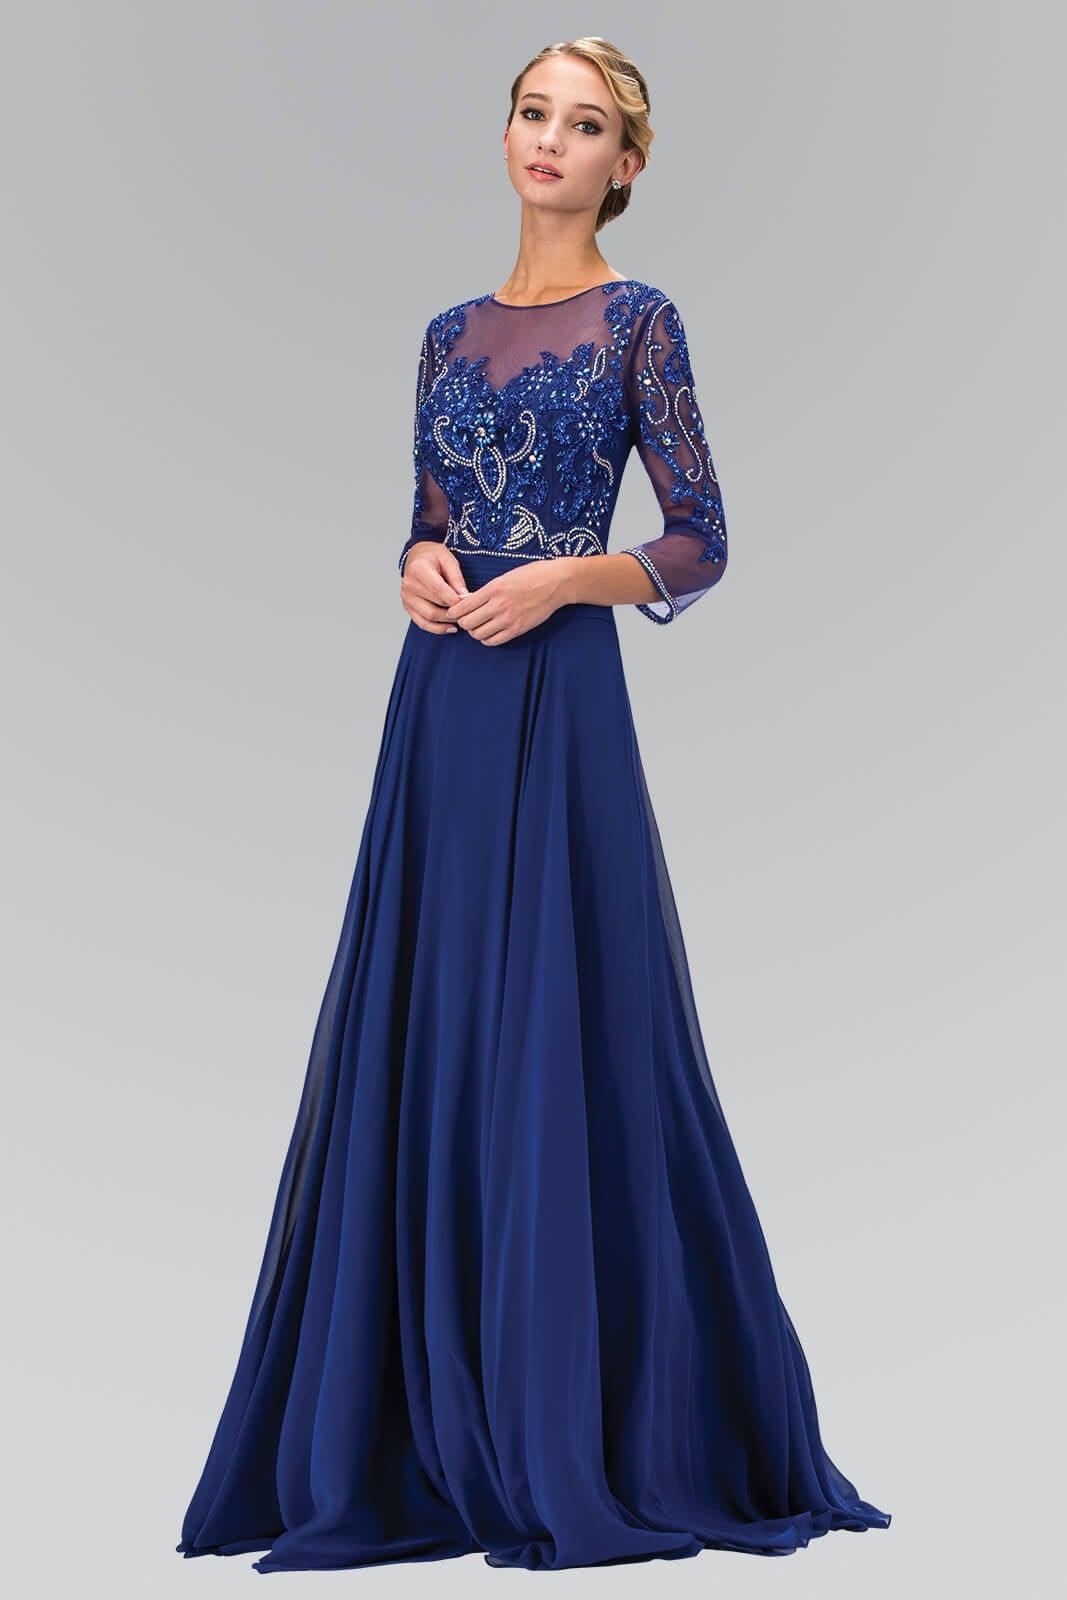 Formal Chiffon Long Dress for $204.99 – The Dress Outlet